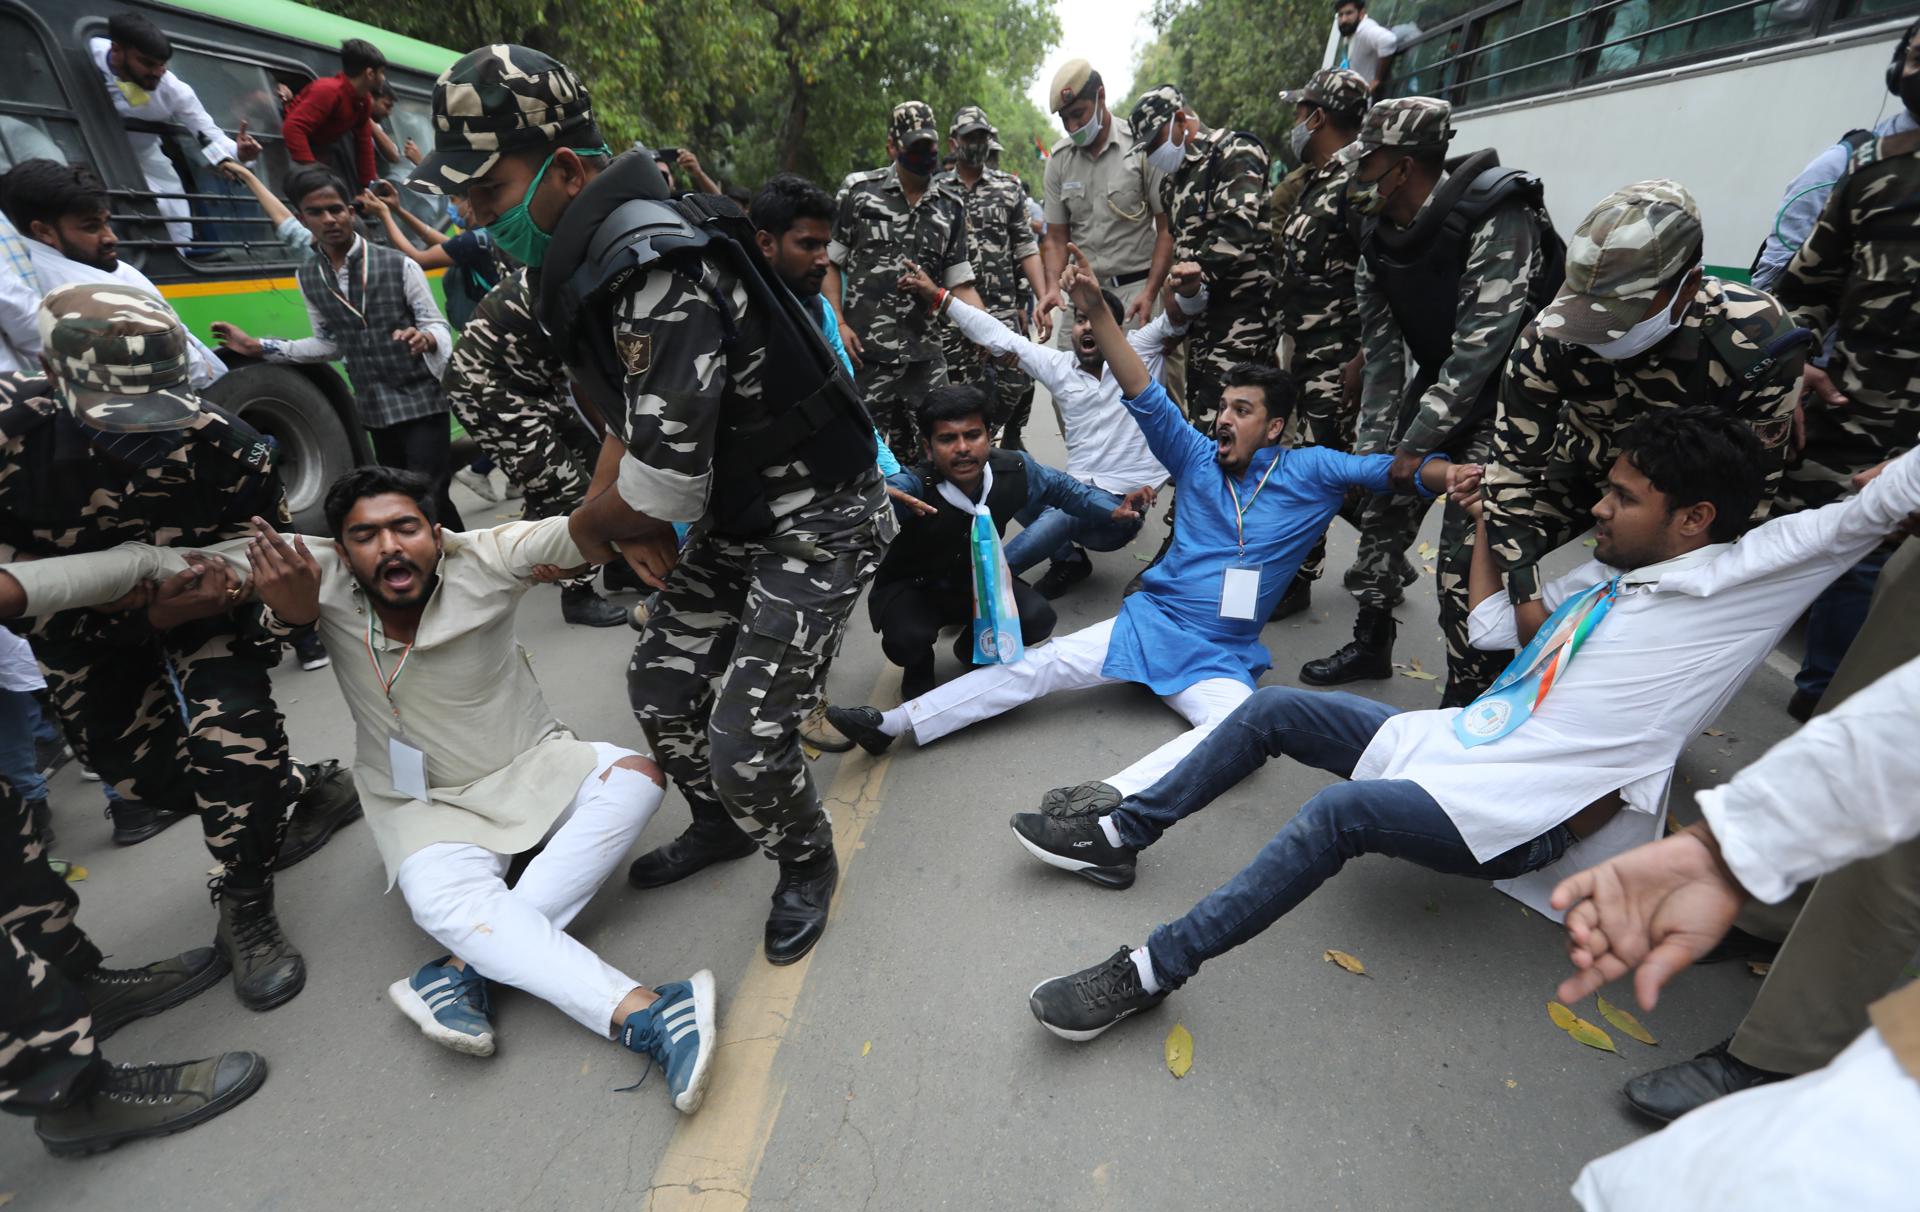 Indian police detain members of National Students' Union of India (NSUI) as they protest against the rise in unemployment and Central Government policies, in New Delhi, India, 12 March 2021. EFE/EPA/FILE/RAJAT GUPTA